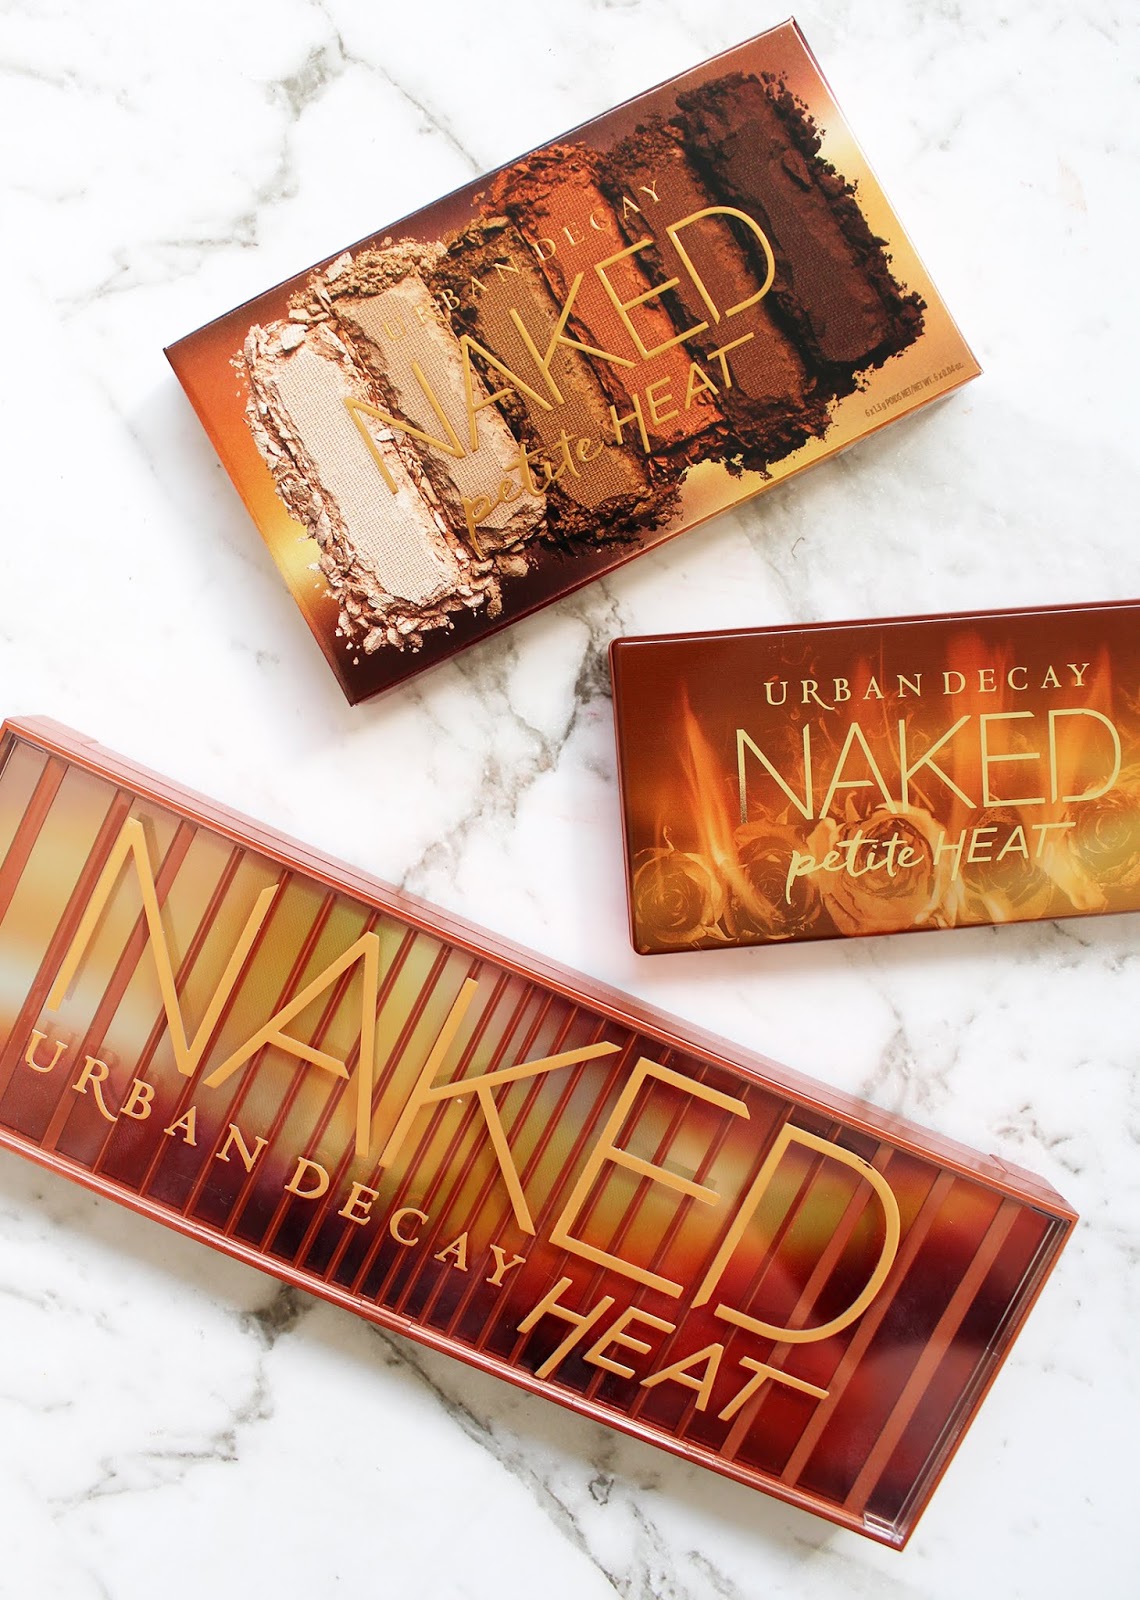 URBAN DECAY | Naked Petite Heat Palette - Review + Swatches - CassandraMyee